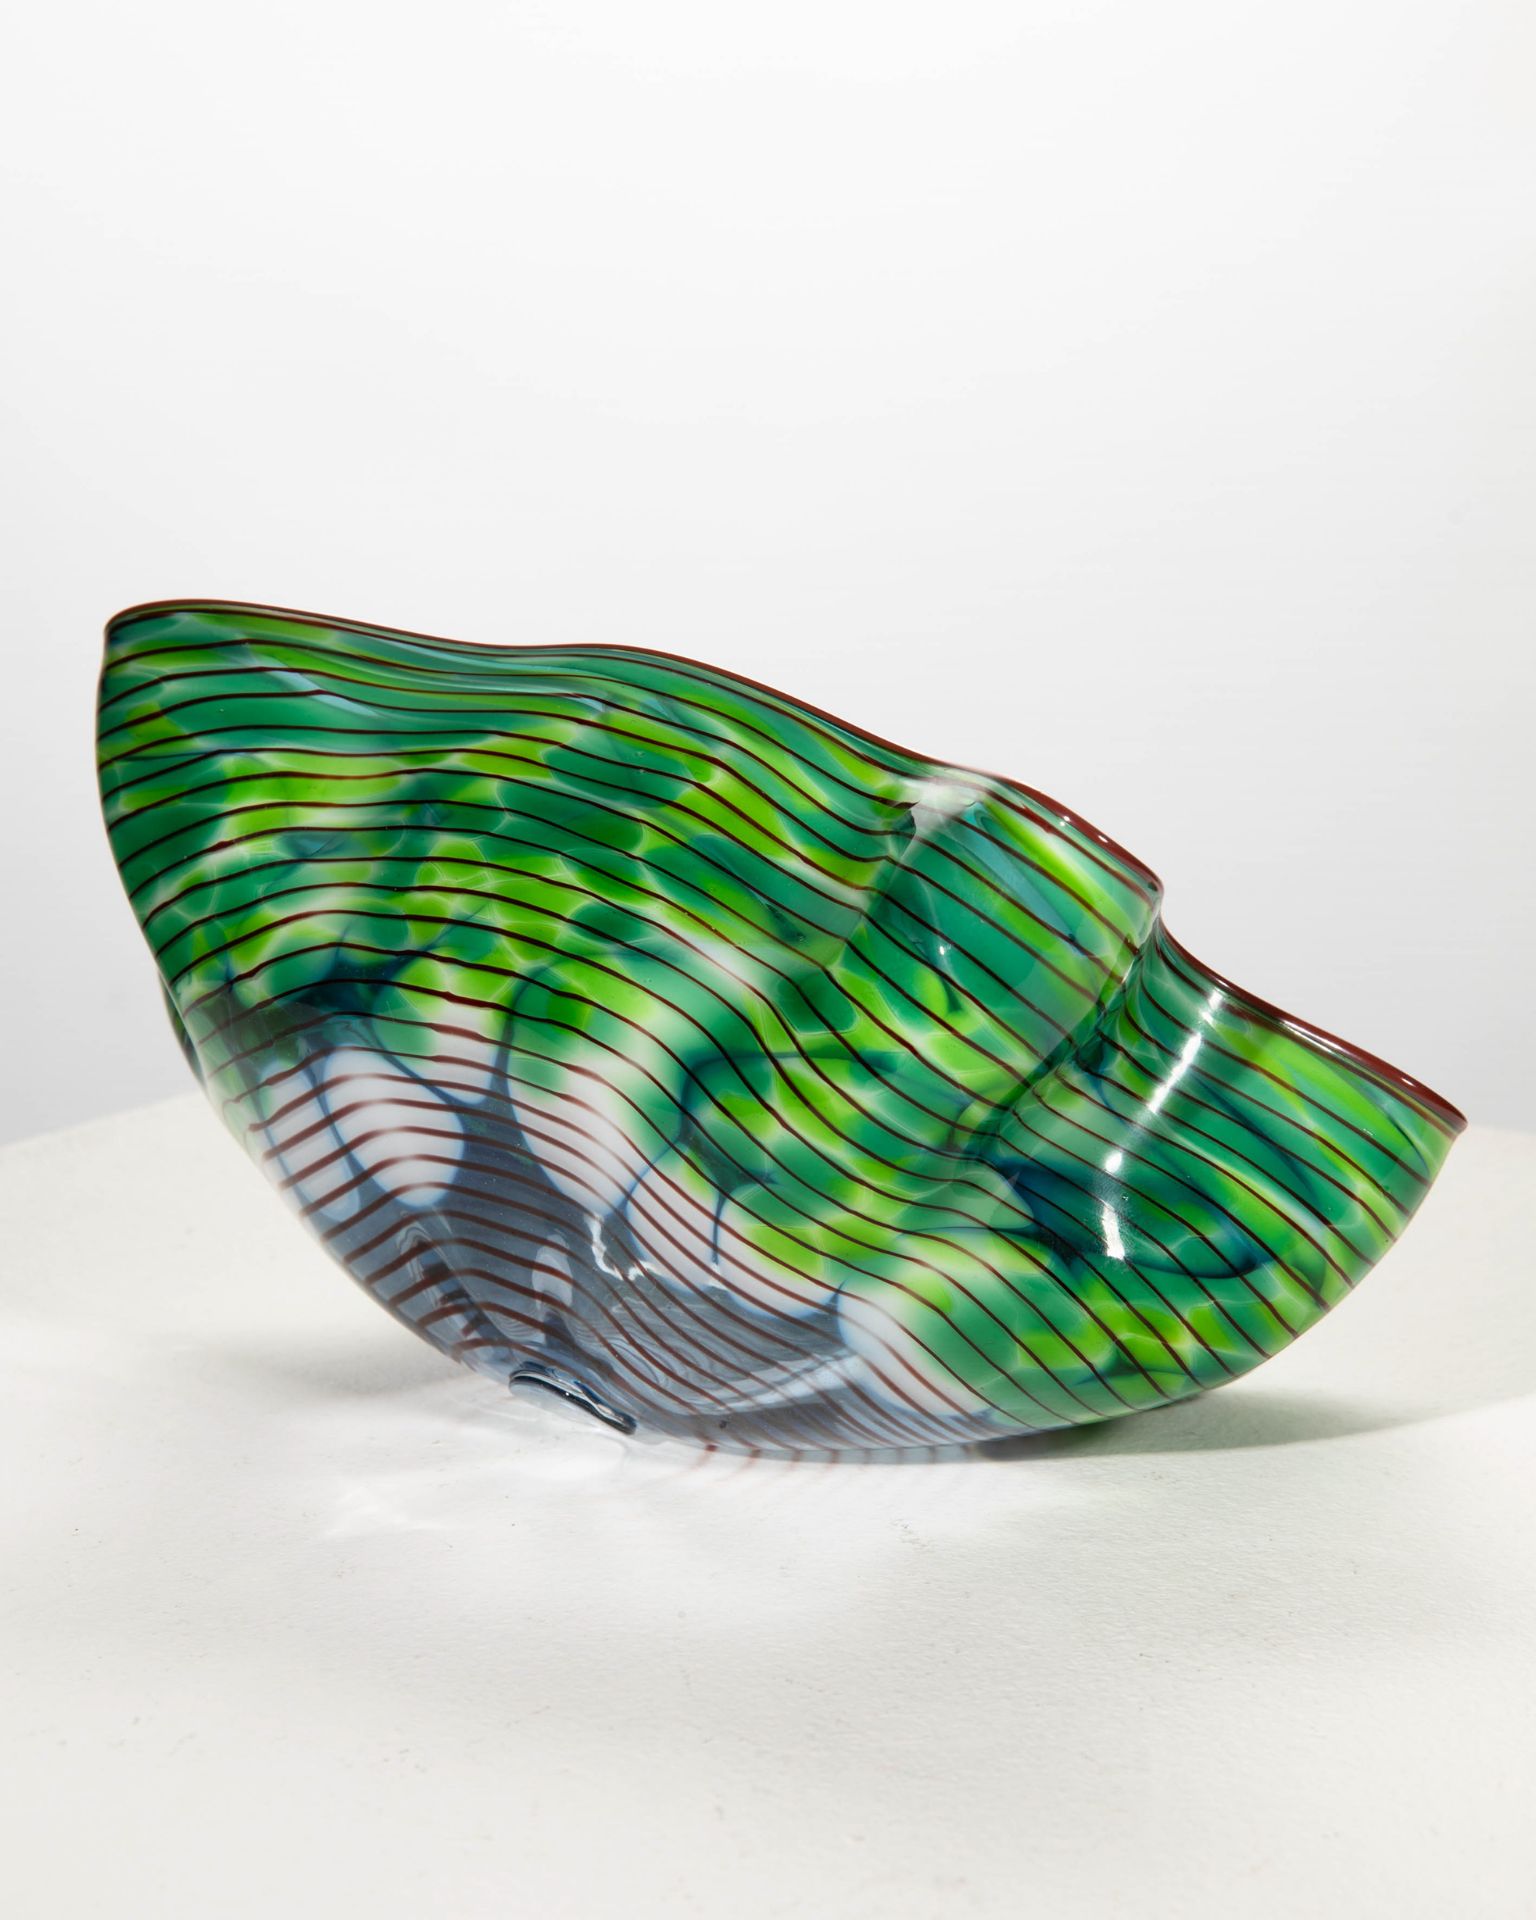 Dale Chihuly, 3 seaforms piece sculptural glasforms - Image 13 of 17